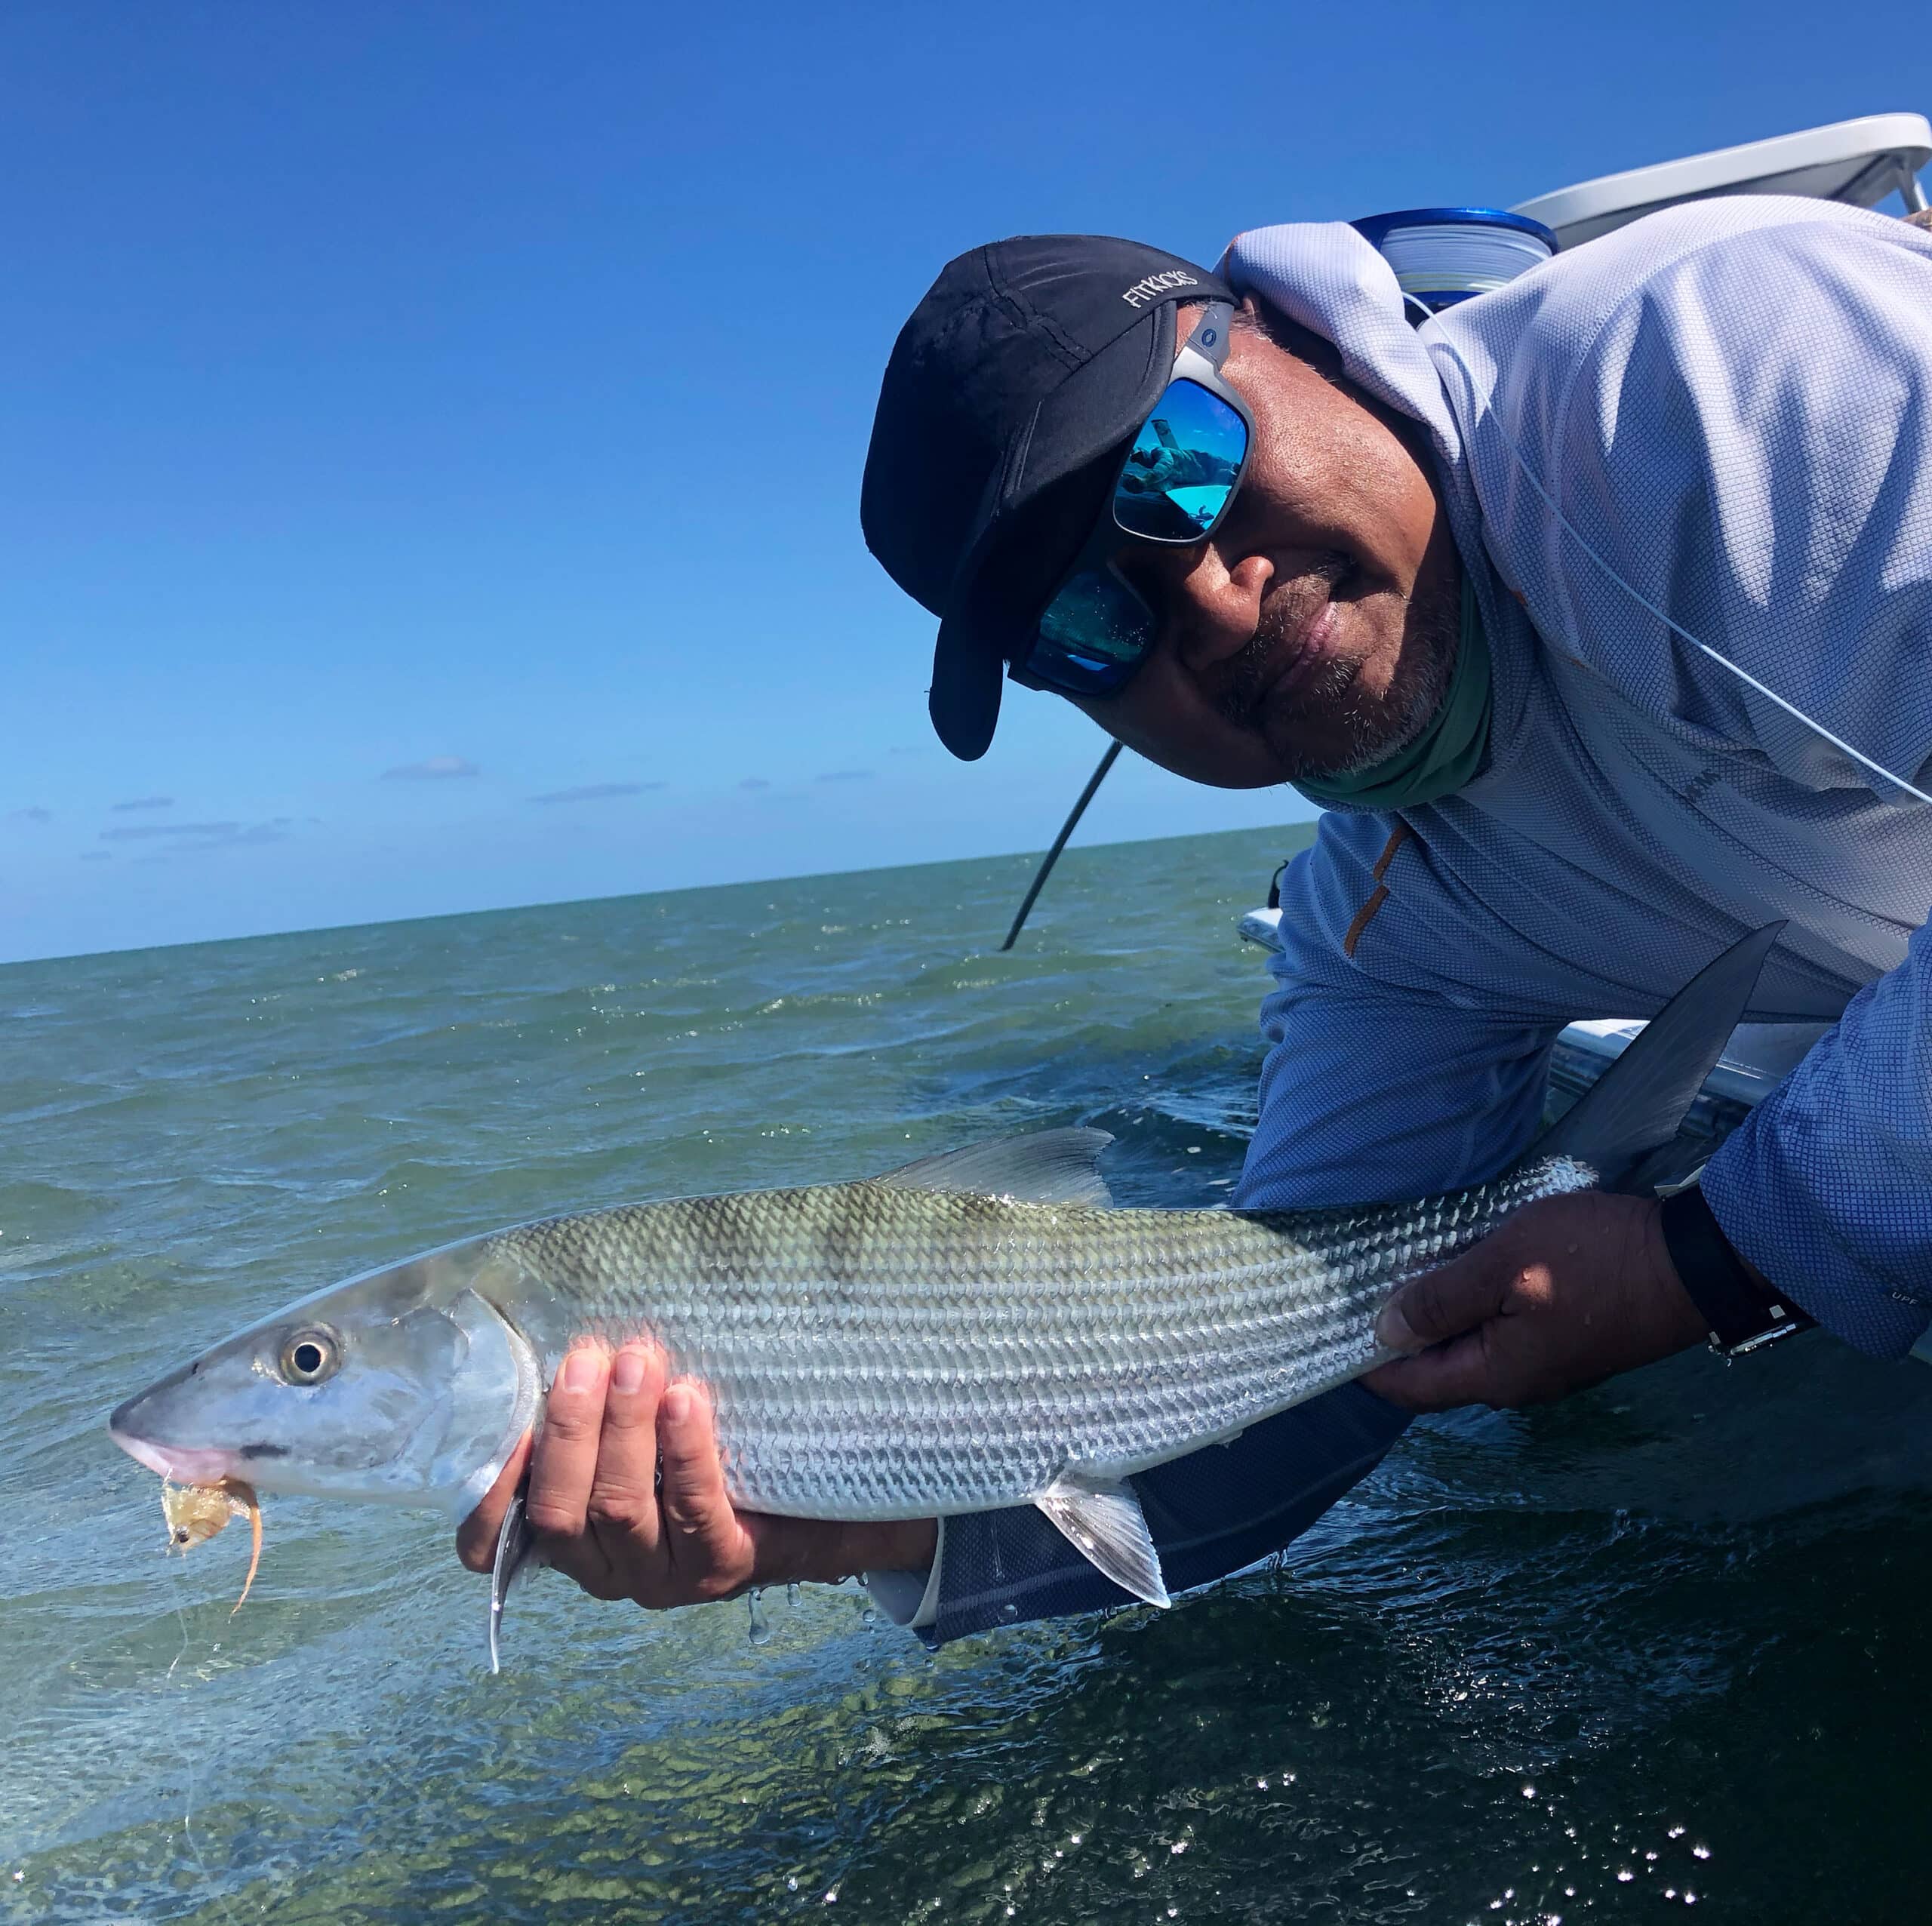 Winter’s Whisper: Fly Fishing for Giant Bonefish in Biscayne Bay